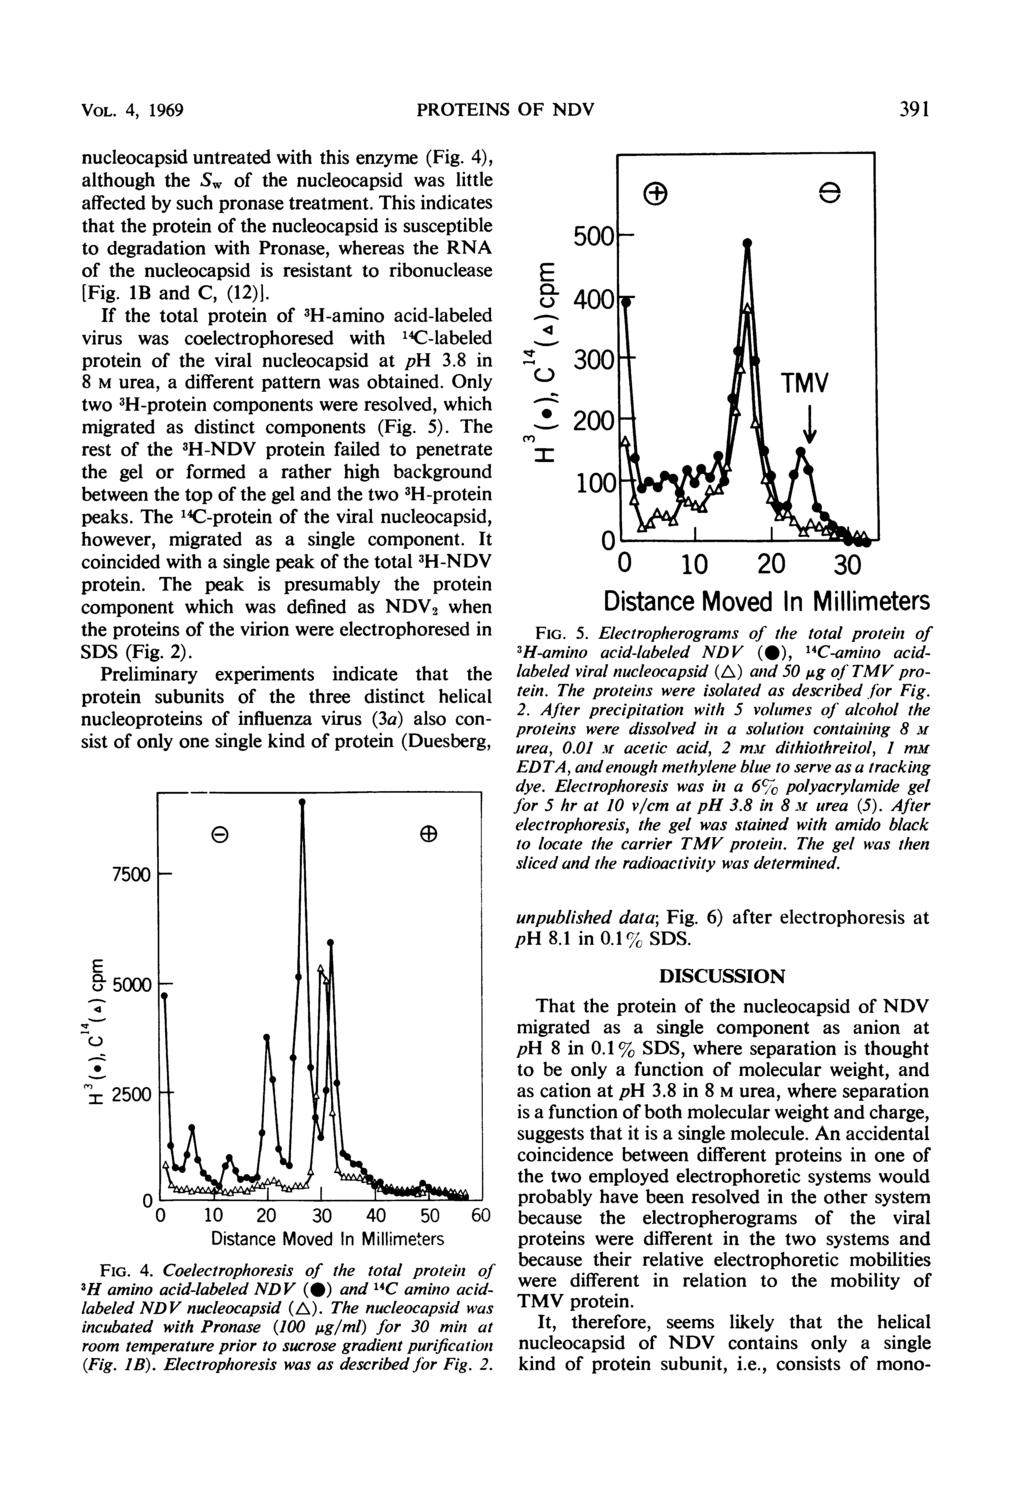 VOL. 4, 1969 PROTINS OF NDV 391 nucleocapsid untreated with this enzyme (Fig. 4), although the S, of the nucleocapsid was little affected by such pronase treatment.